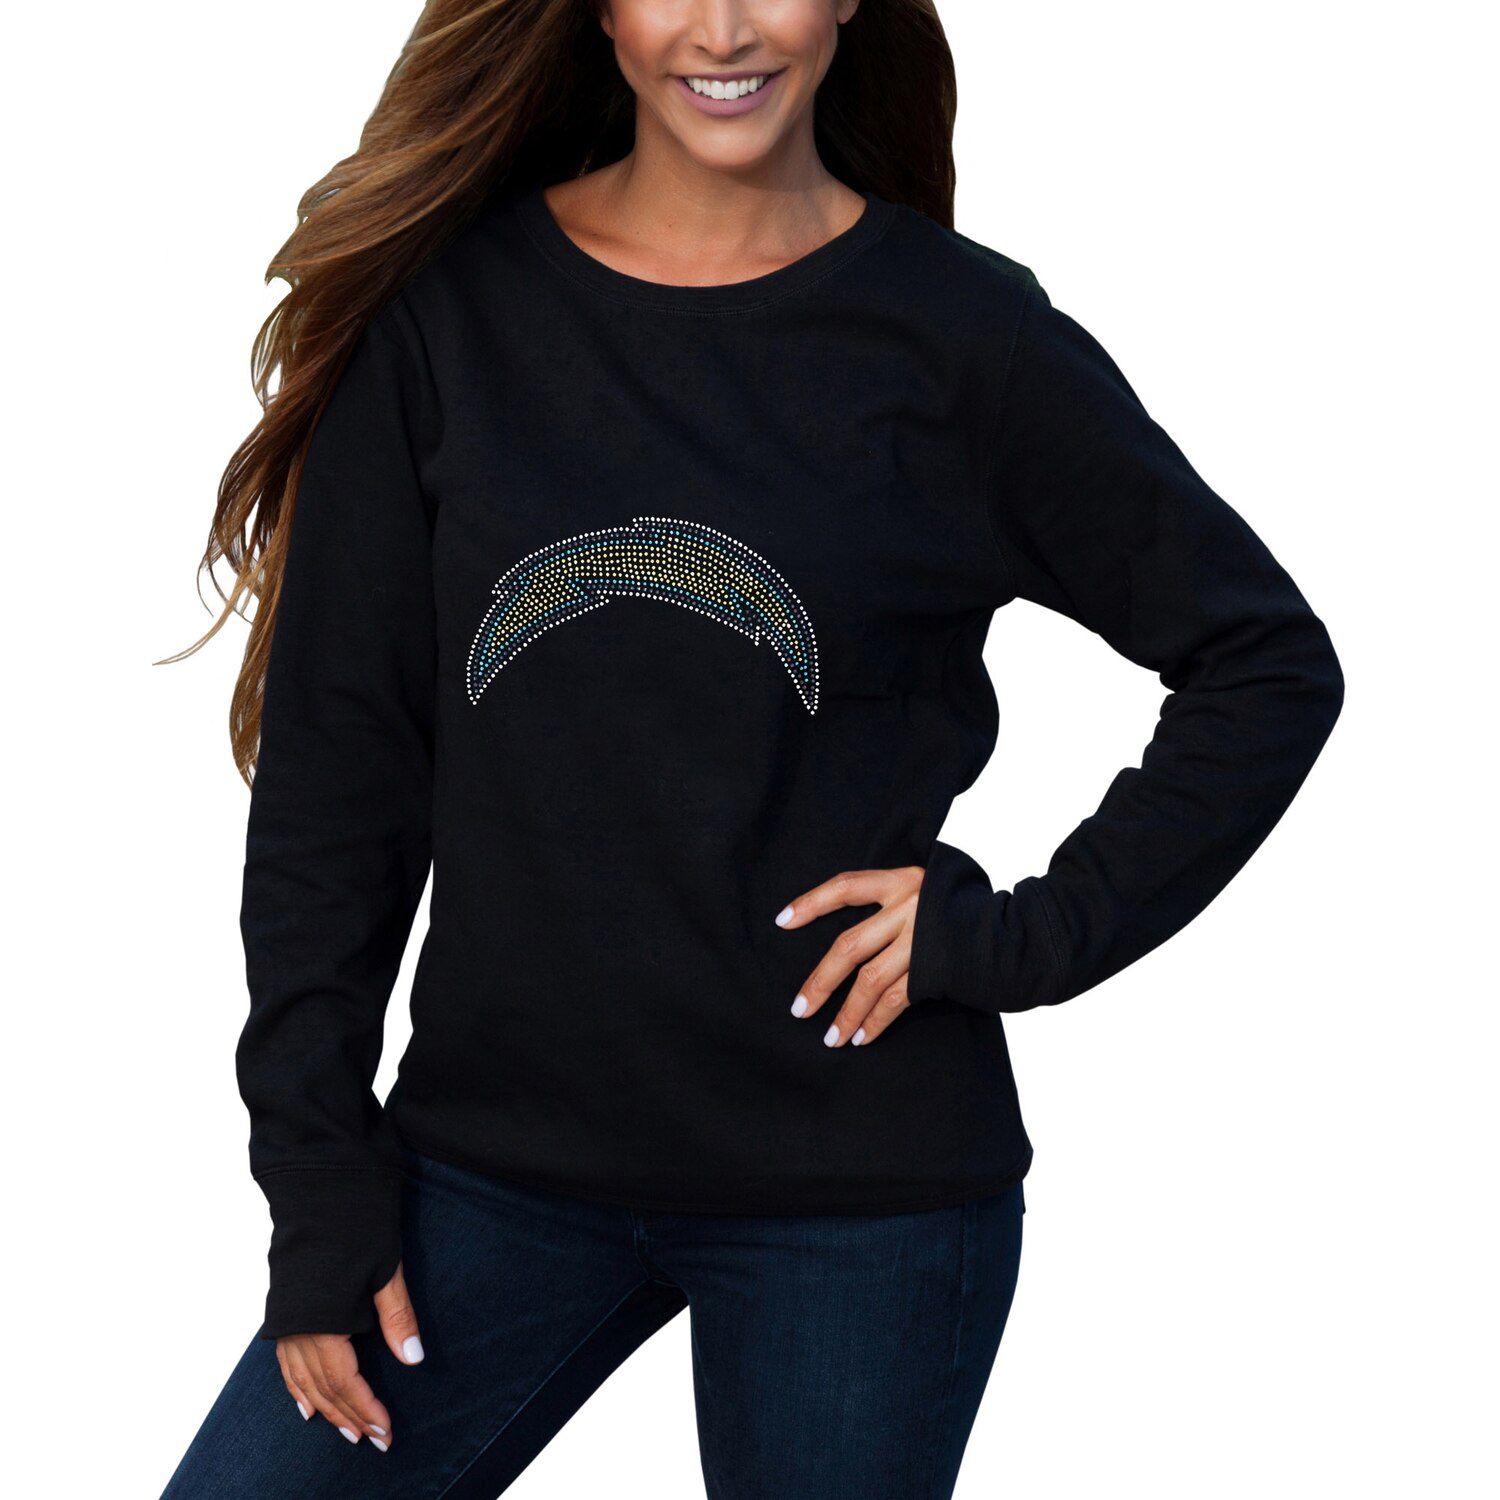 chargers pullover